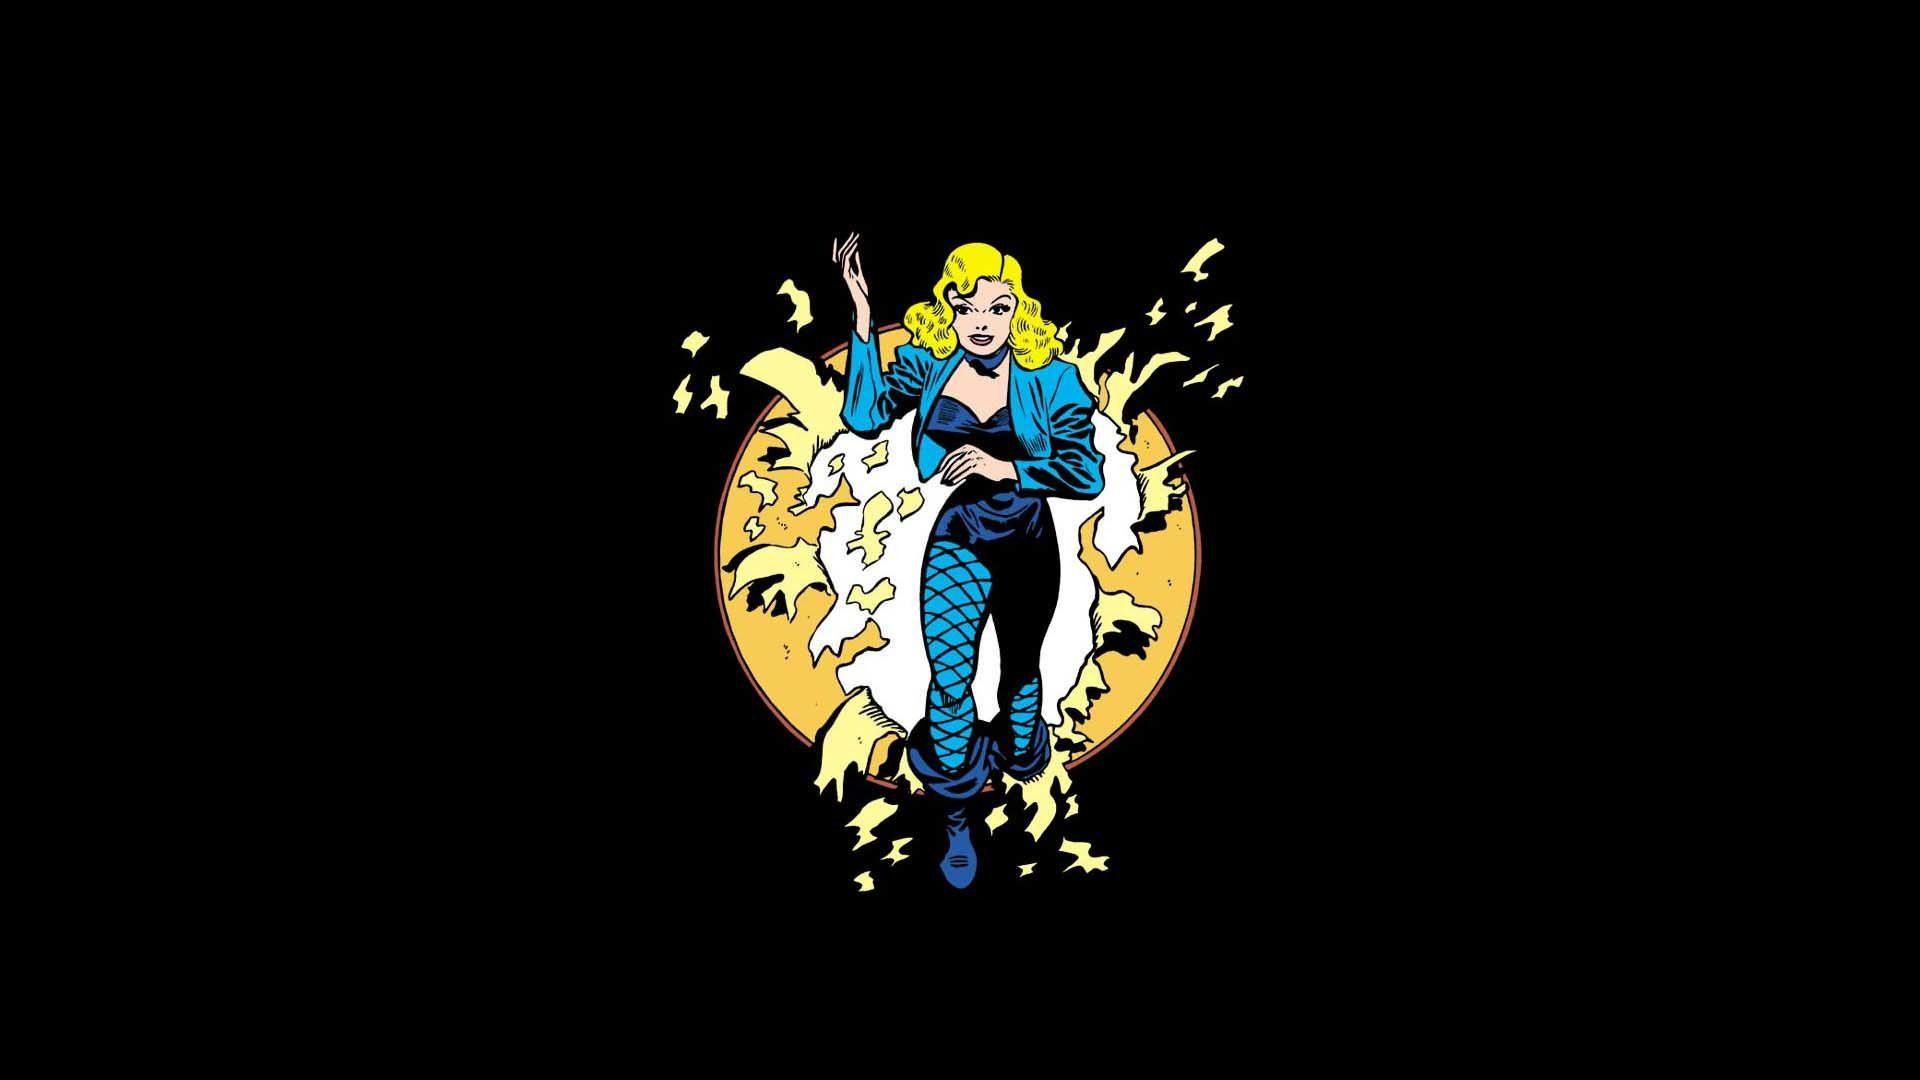 Download Dc Comics Black Canary Best Live Wallpapers Photos Backgrounds  Wallpaper 